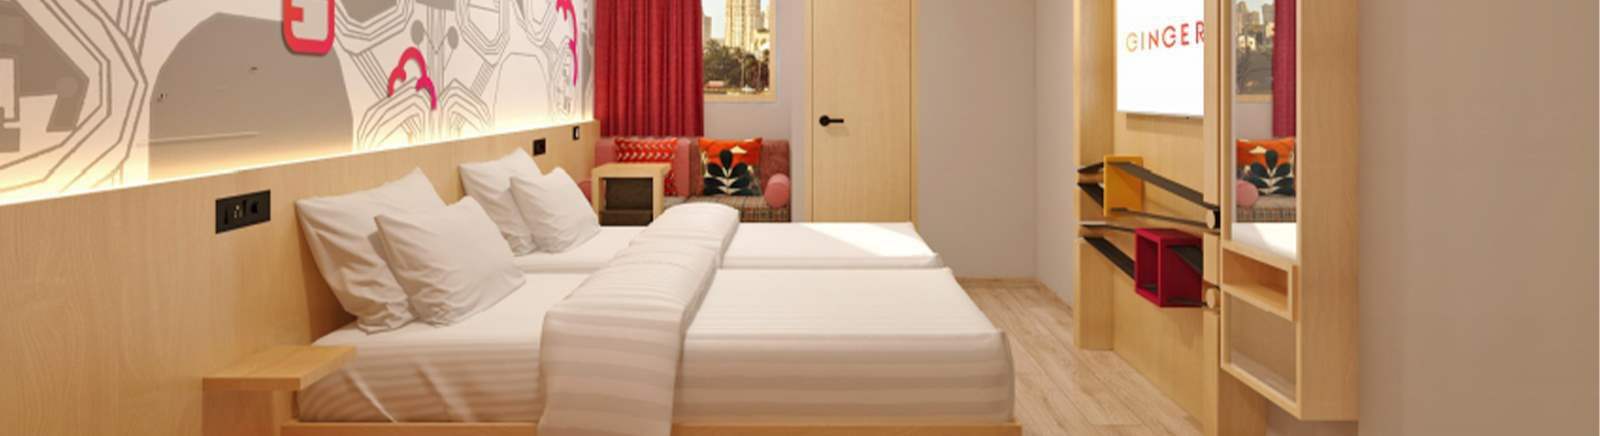 Ginger Bangalore Whitefield Hotel Rooms